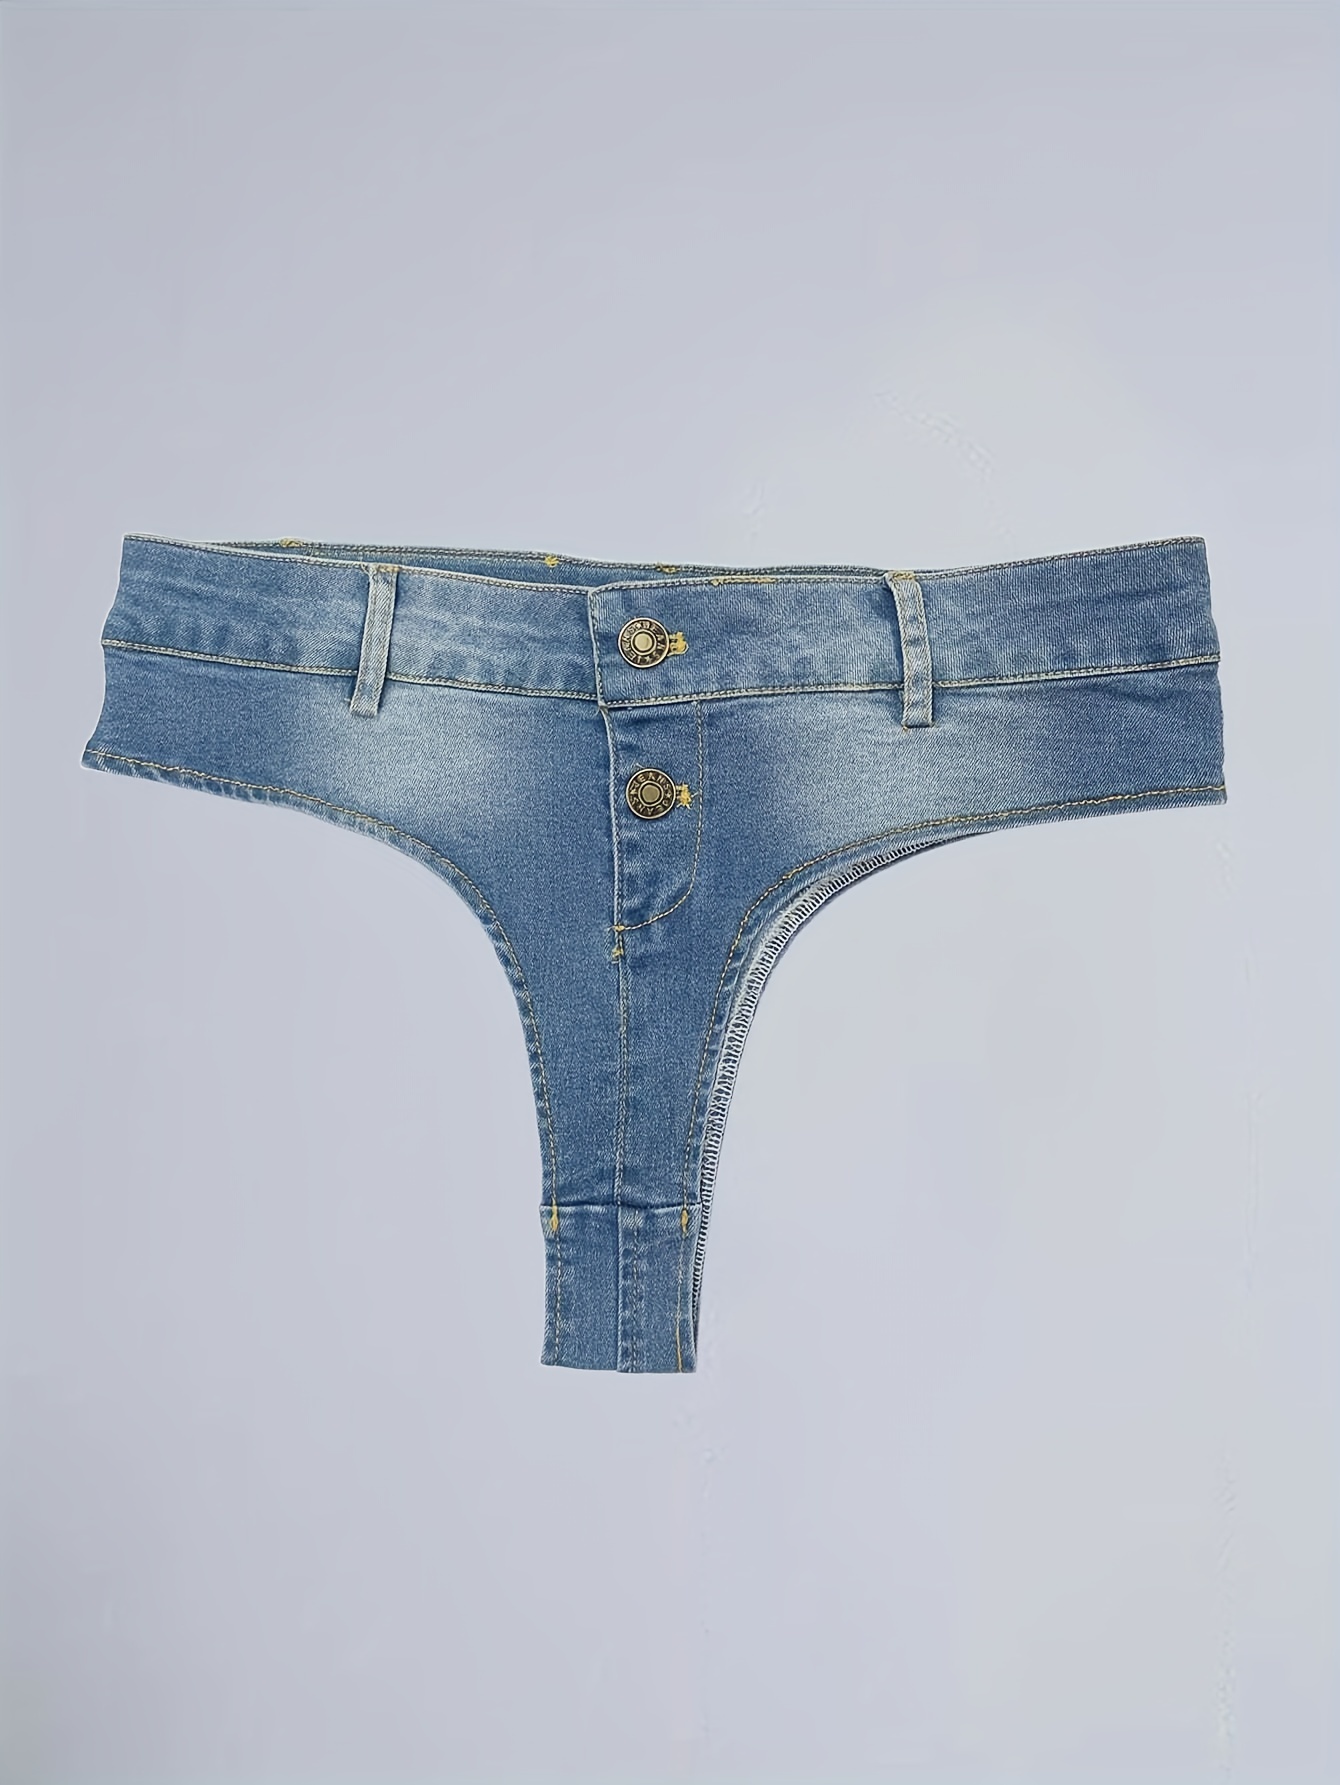 Denim Blue Jeans Style Booty Shorts High Waisted Stretch Mini Hot Pants  Small